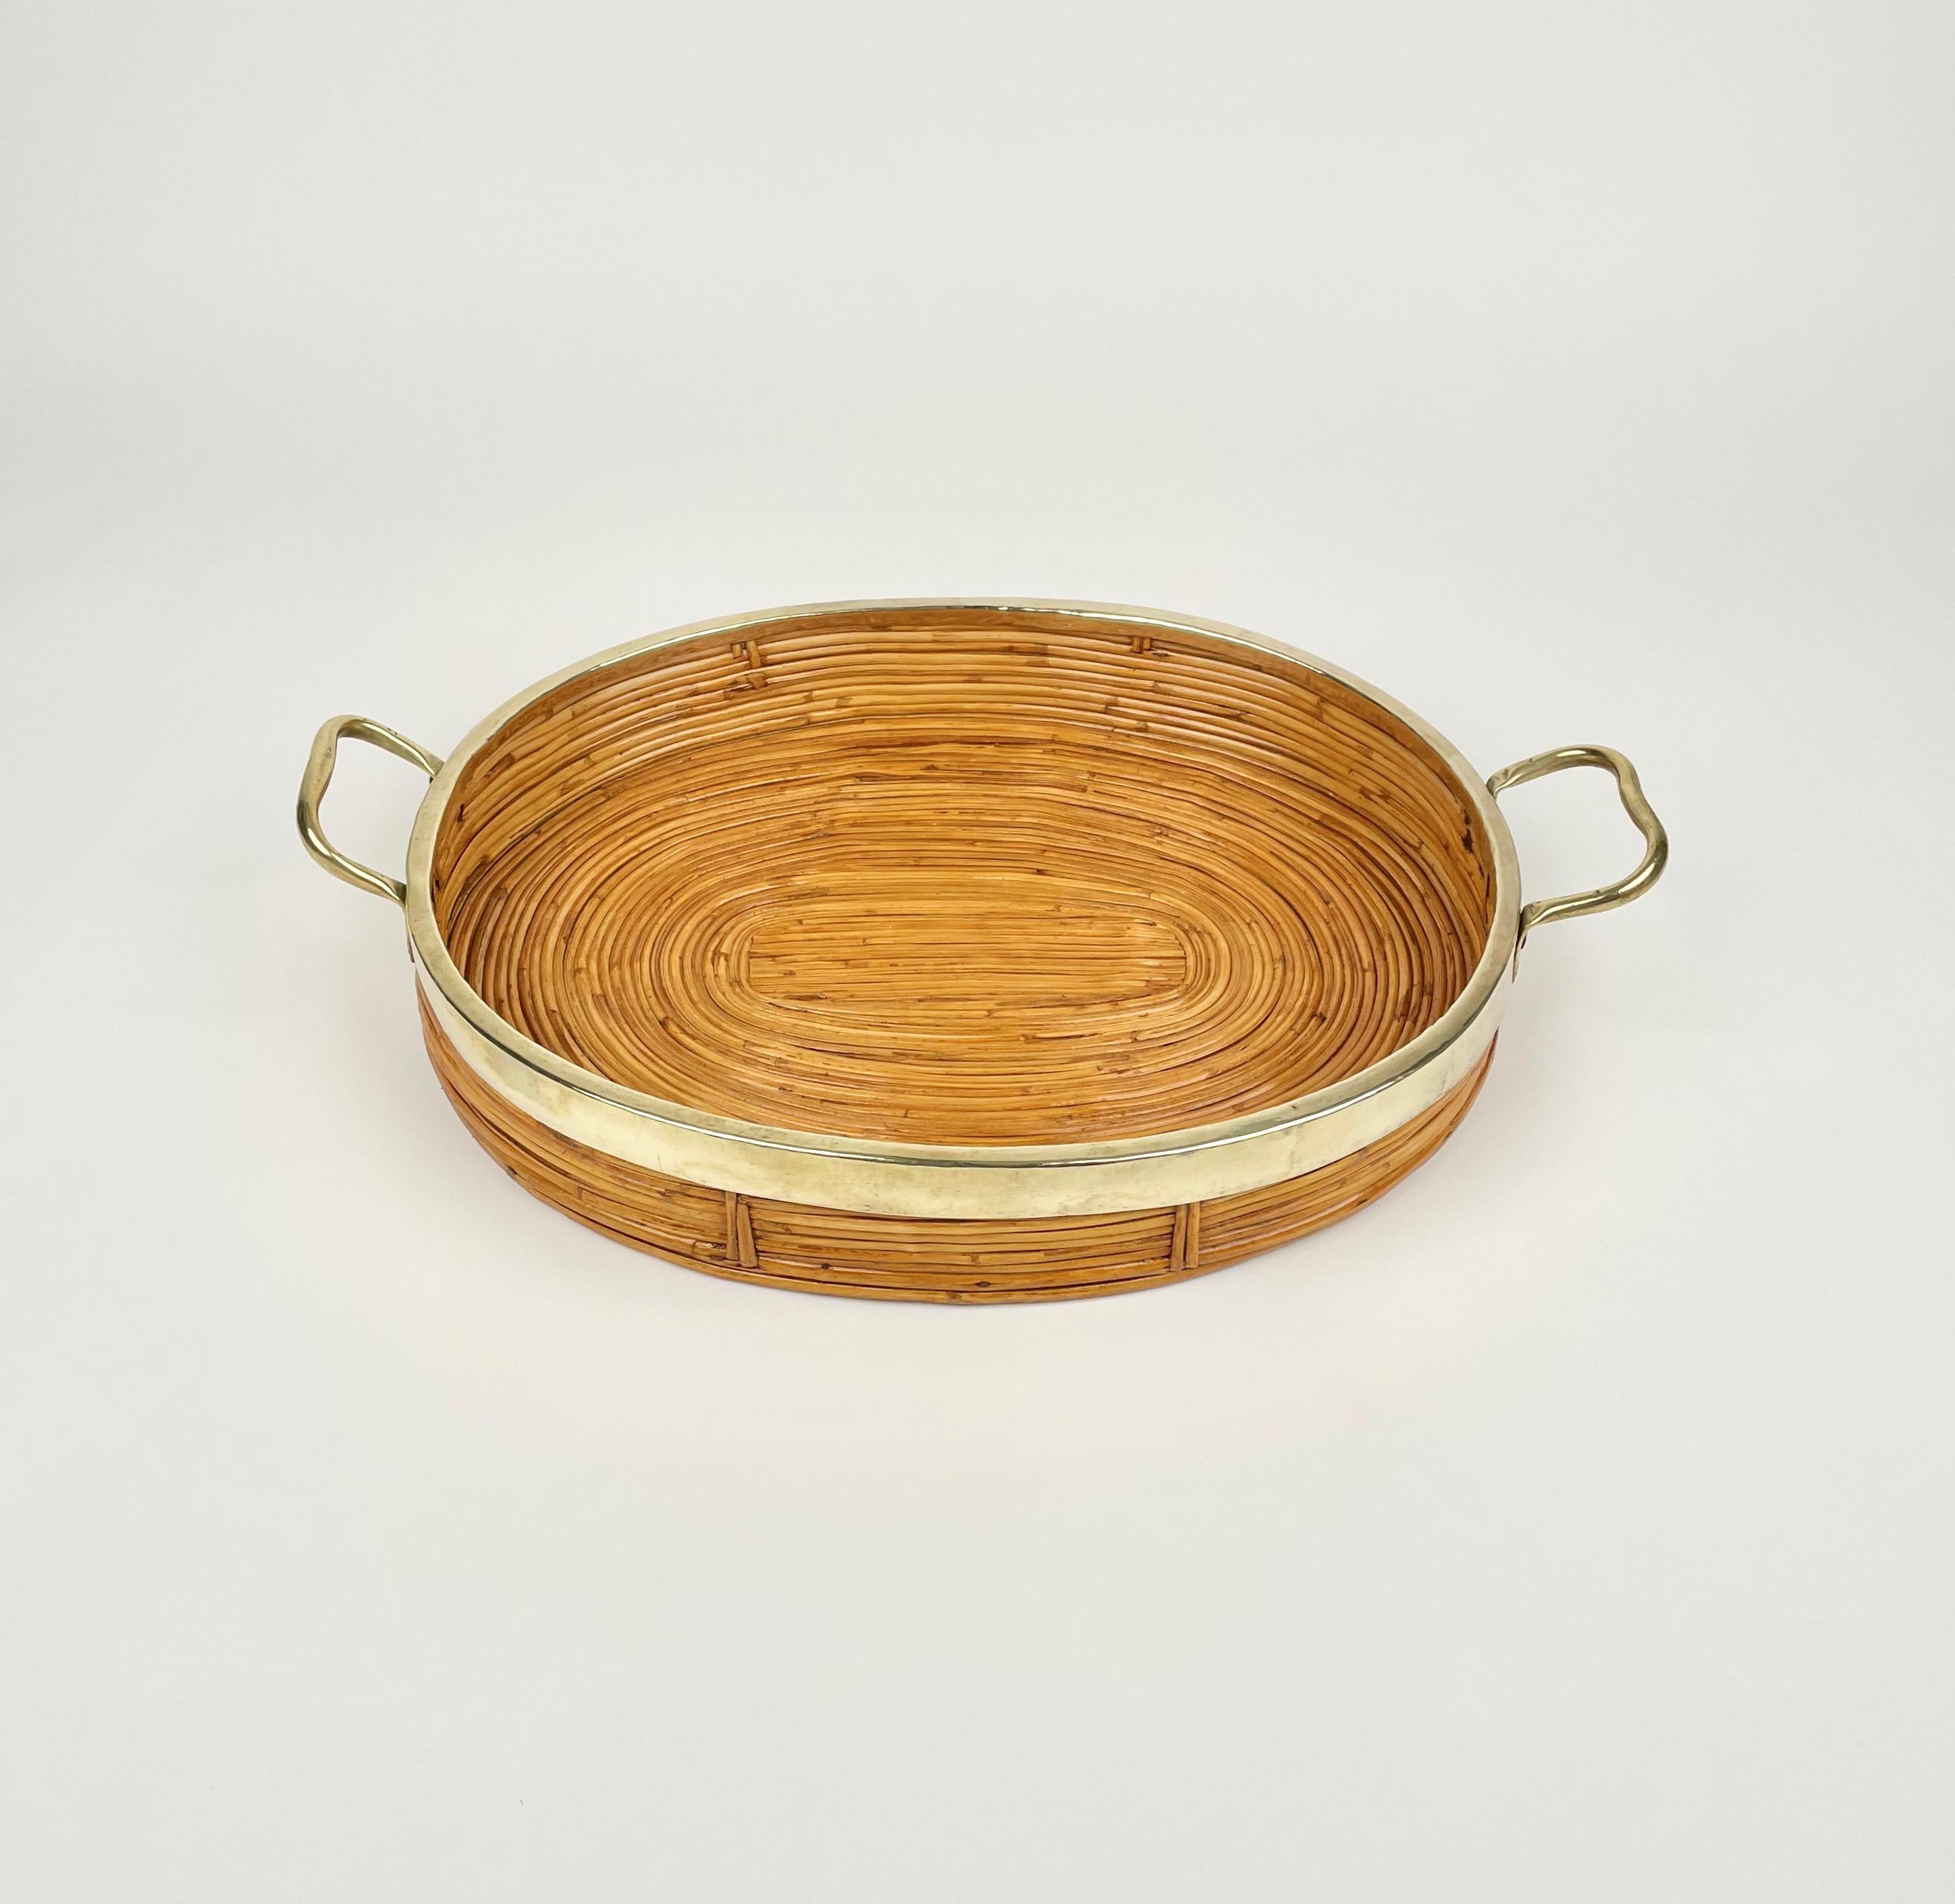 Oval Serving Tray Bamboo, Rattan & Brass, Italy 1970s For Sale 2